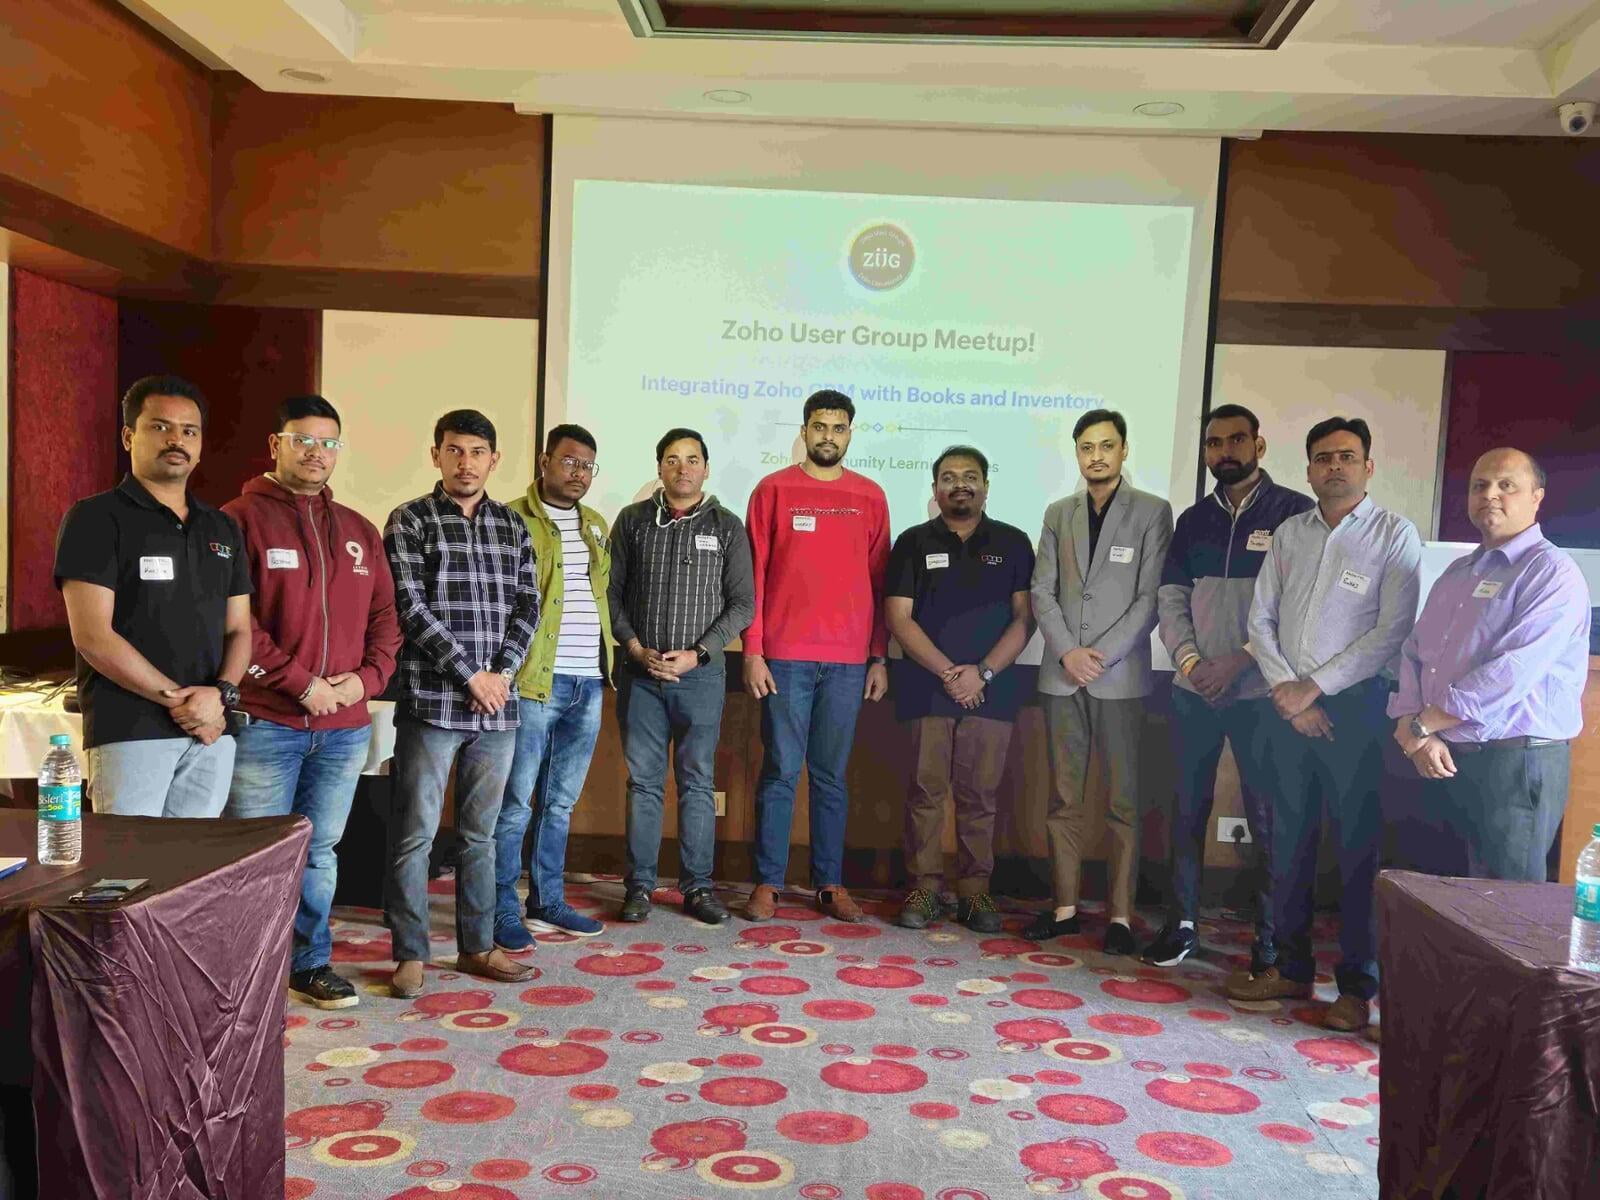 BMI attended the Zoho user group in India